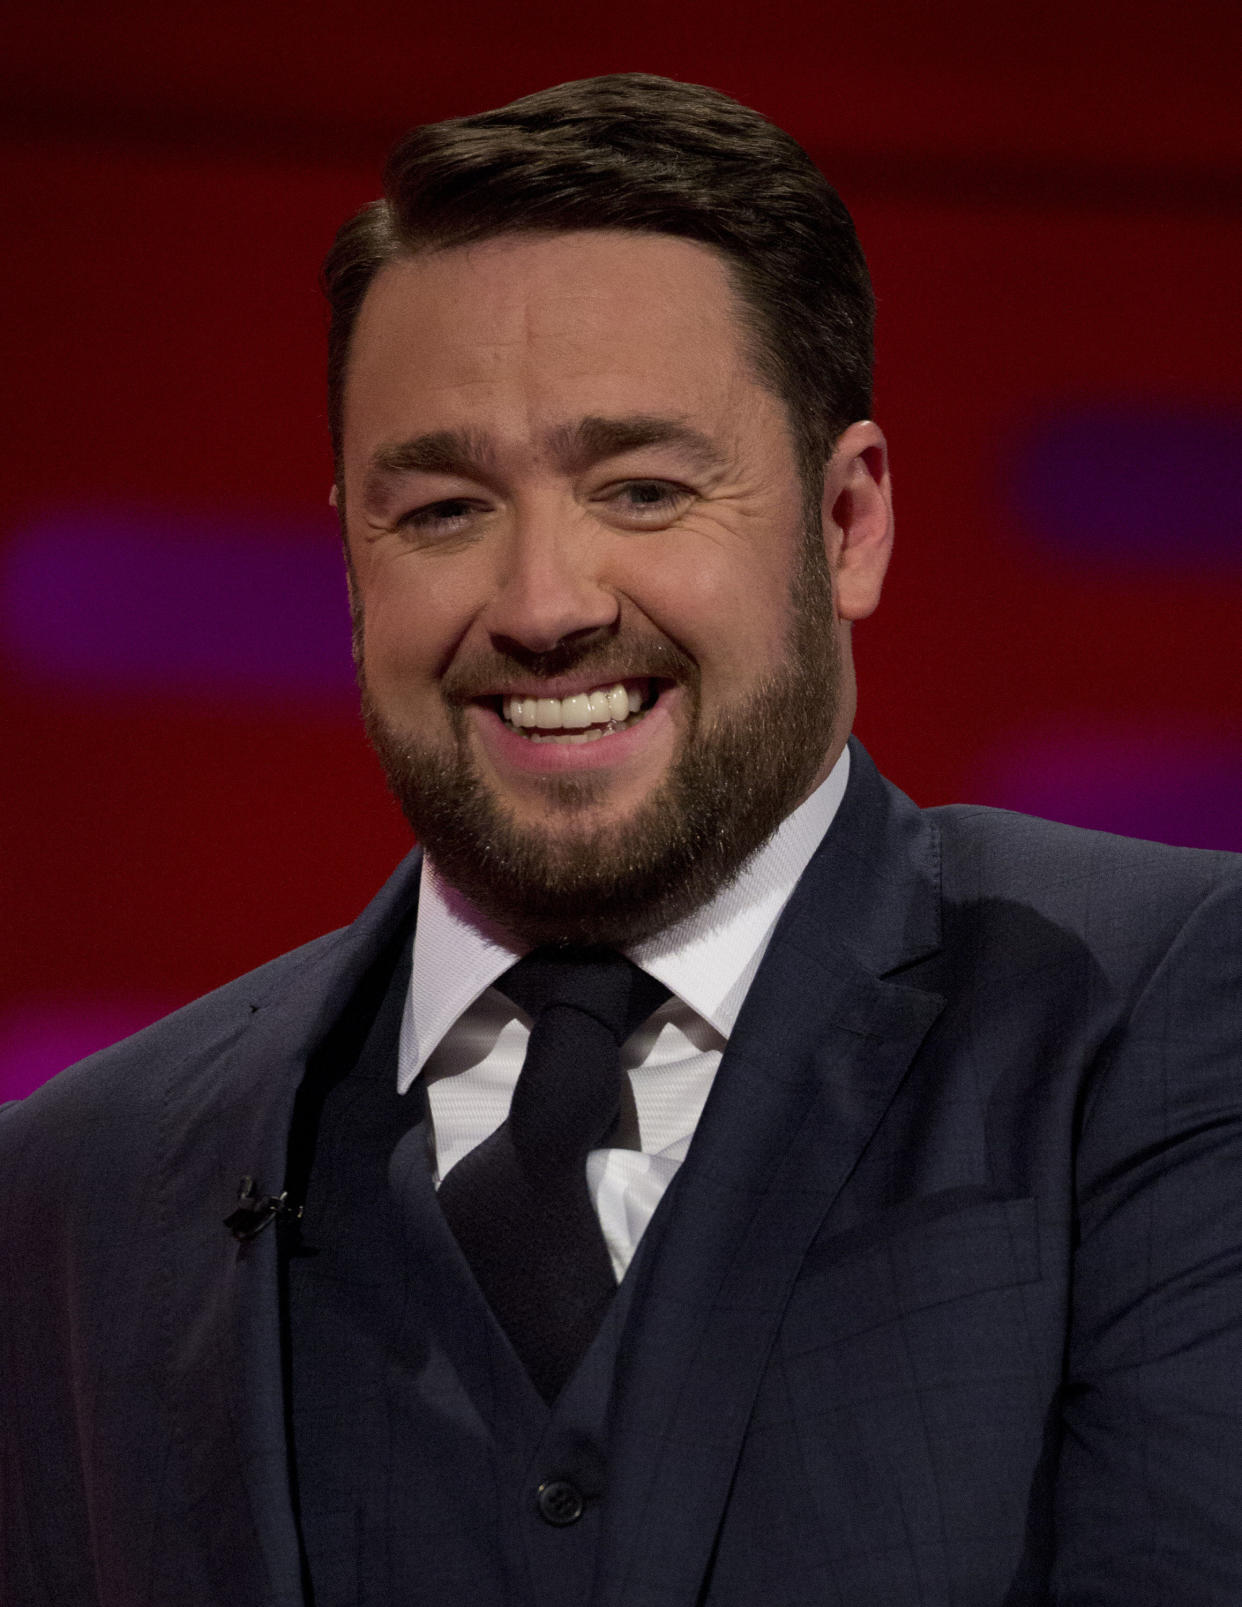 Jason Manford during the filming of the Graham Norton Show at The London Studios, to be aired on BBC One on Friday.